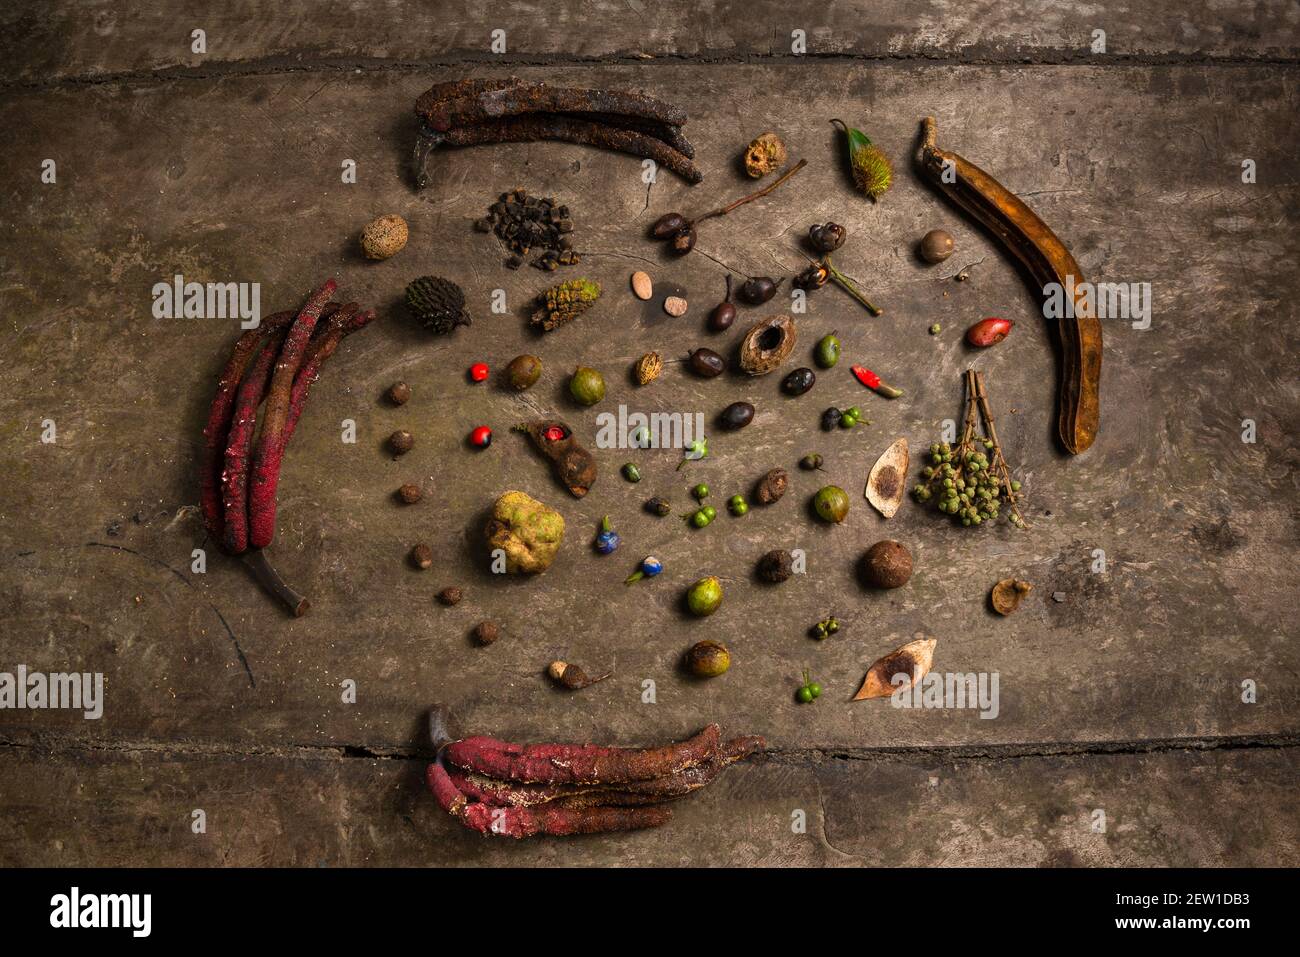 Varied seeds and fruits collected on the ground in the Atlantic Rainforest of SE Brazil Stock Photo